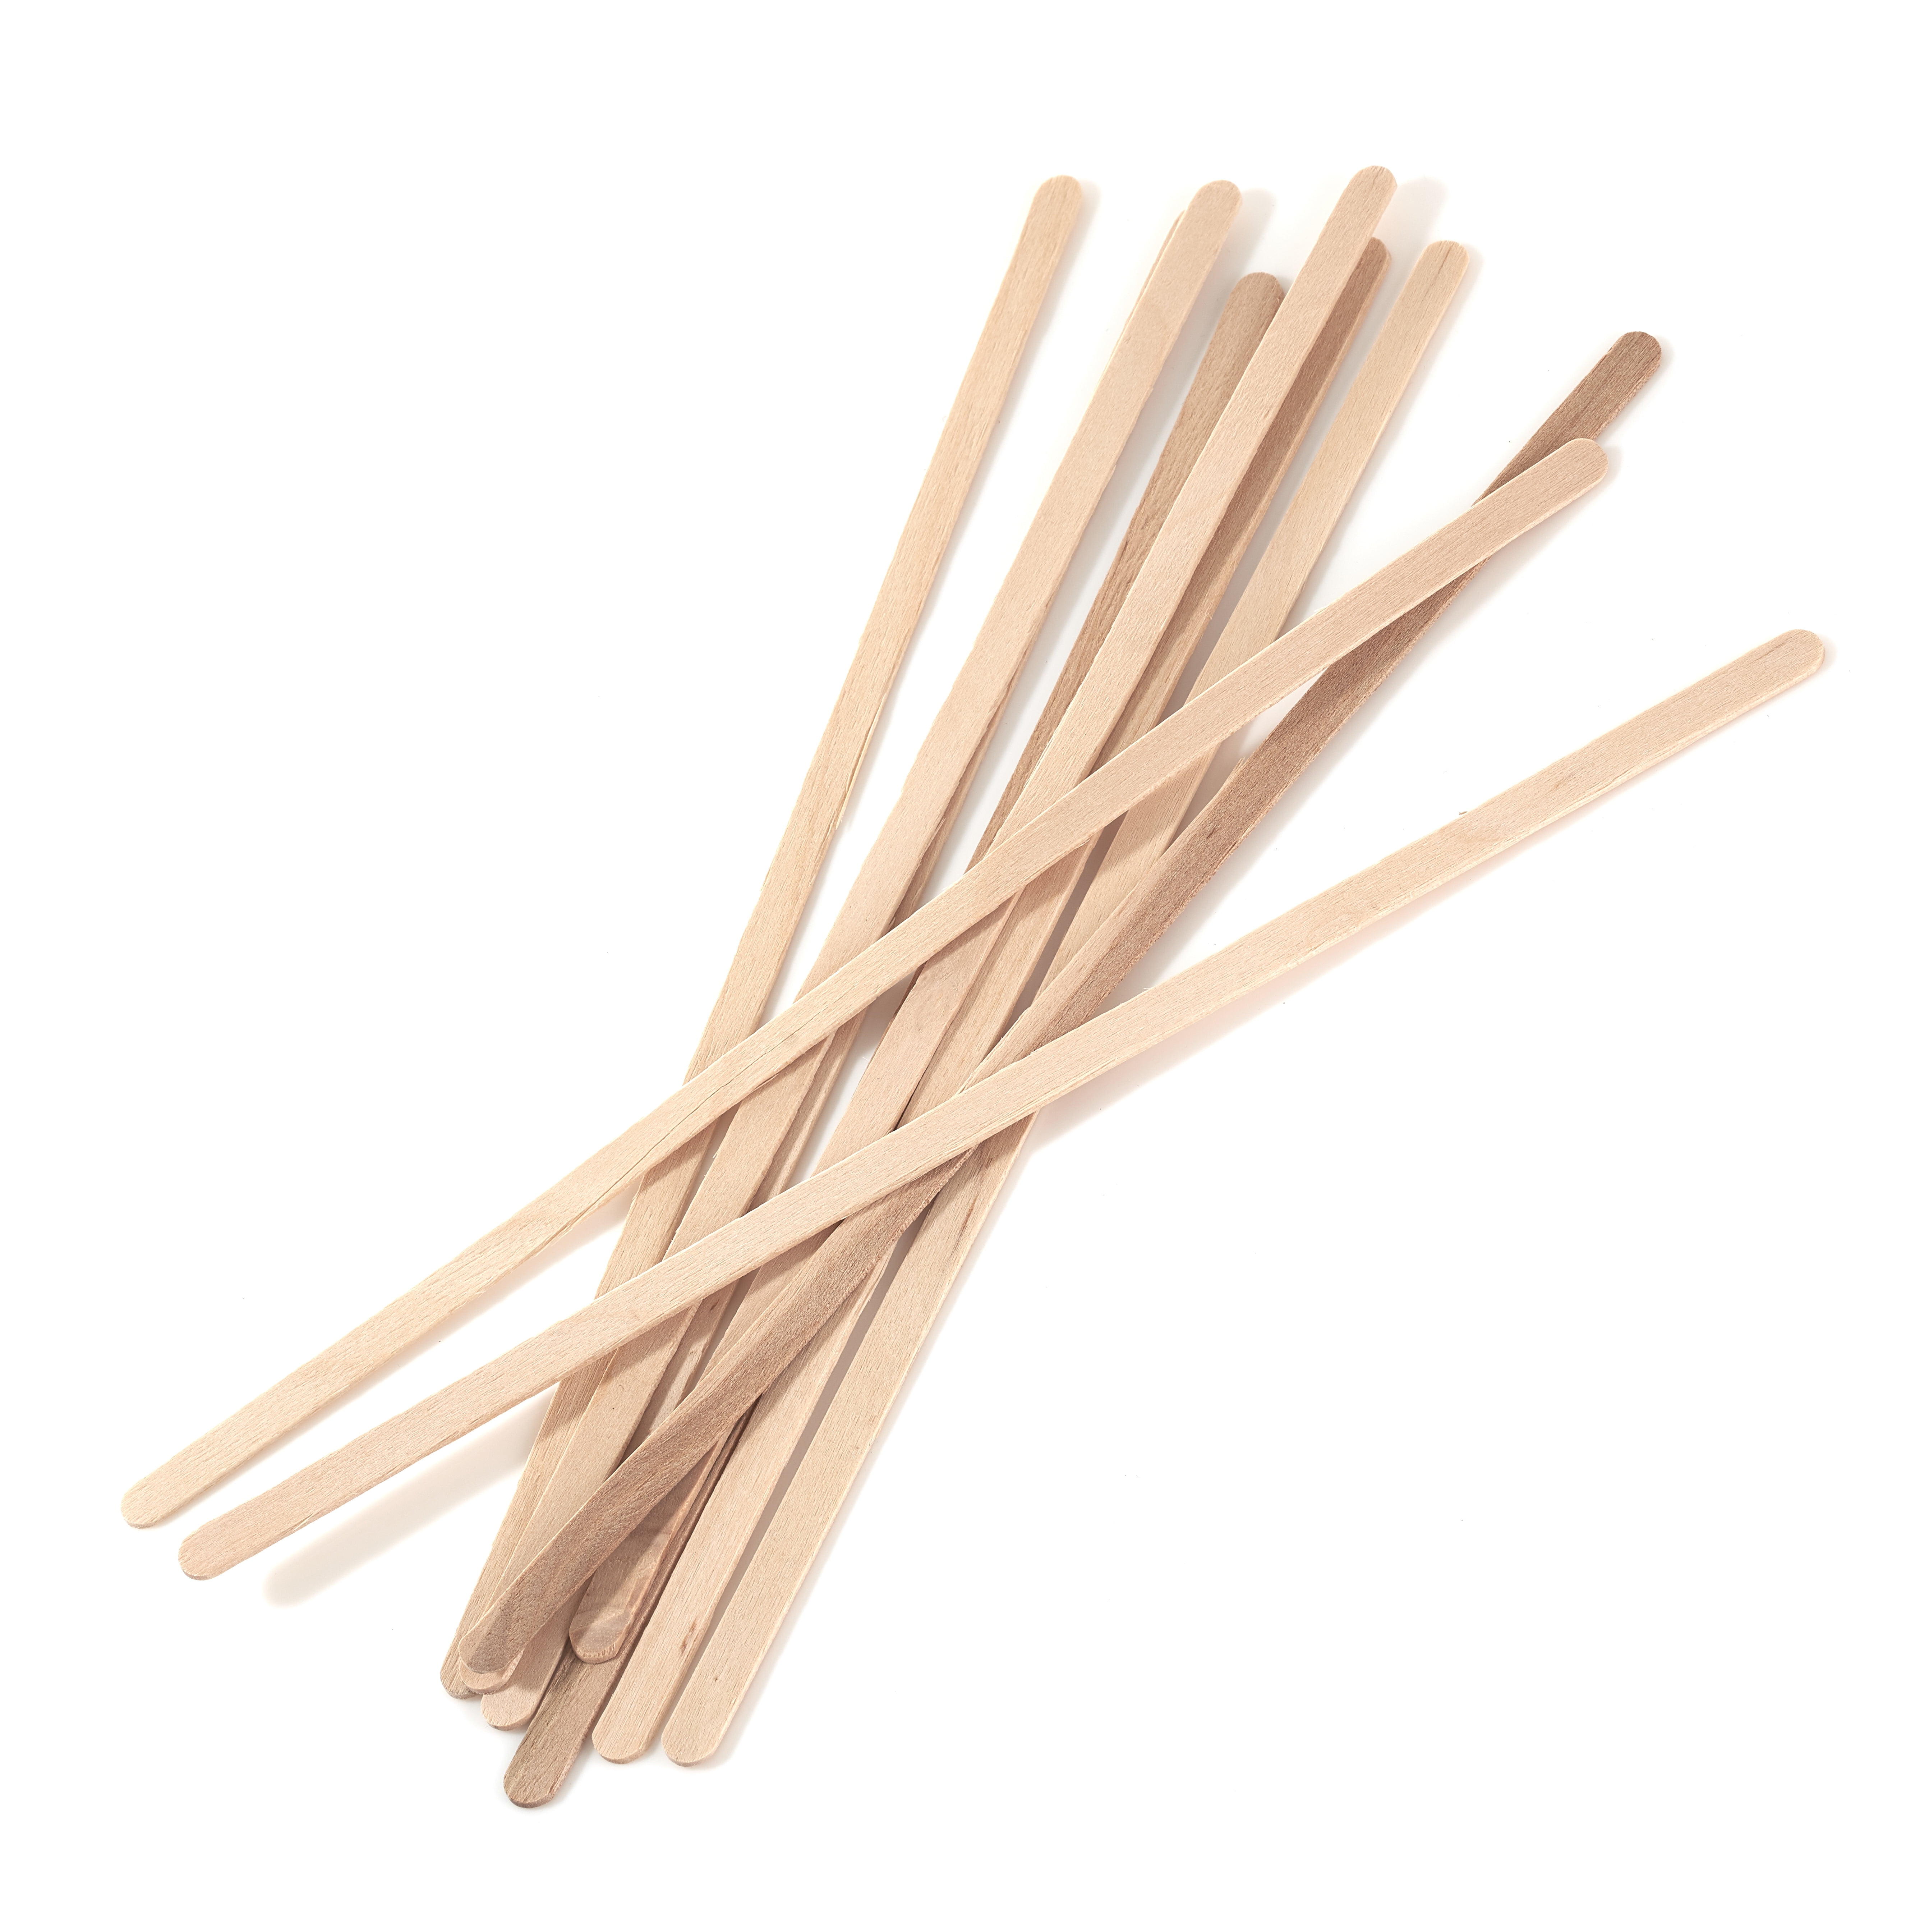 5 1/2 Coffee Stirrers With Round Ends Case of 10 boxes/1,000ct